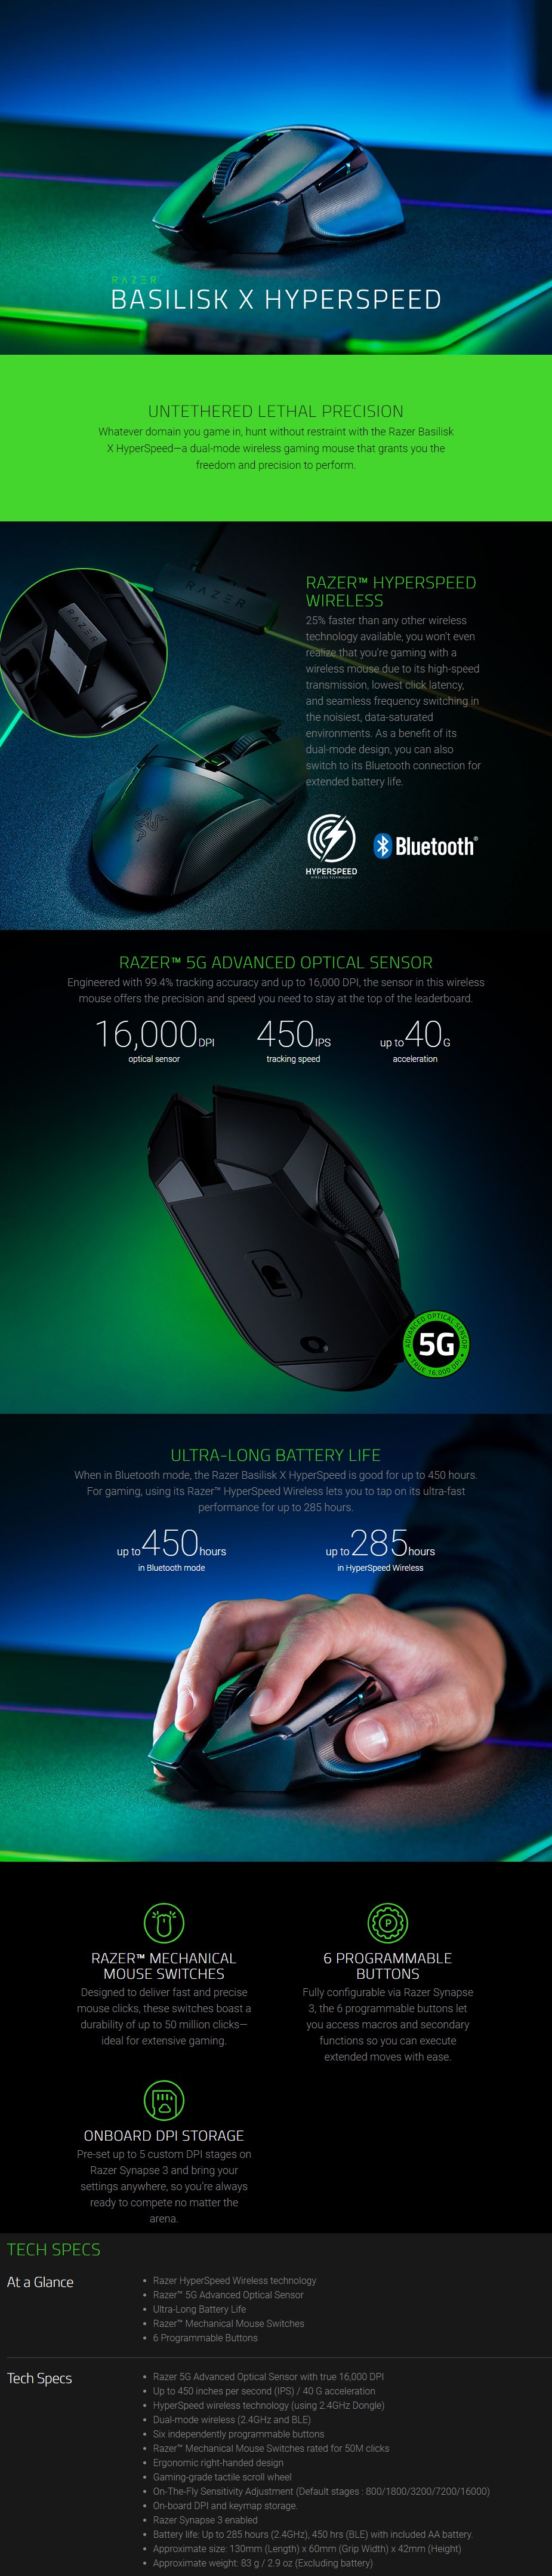 Razer Basilisk X HyperSpeed Wireless Optical Gaming Mouse - Overview 1